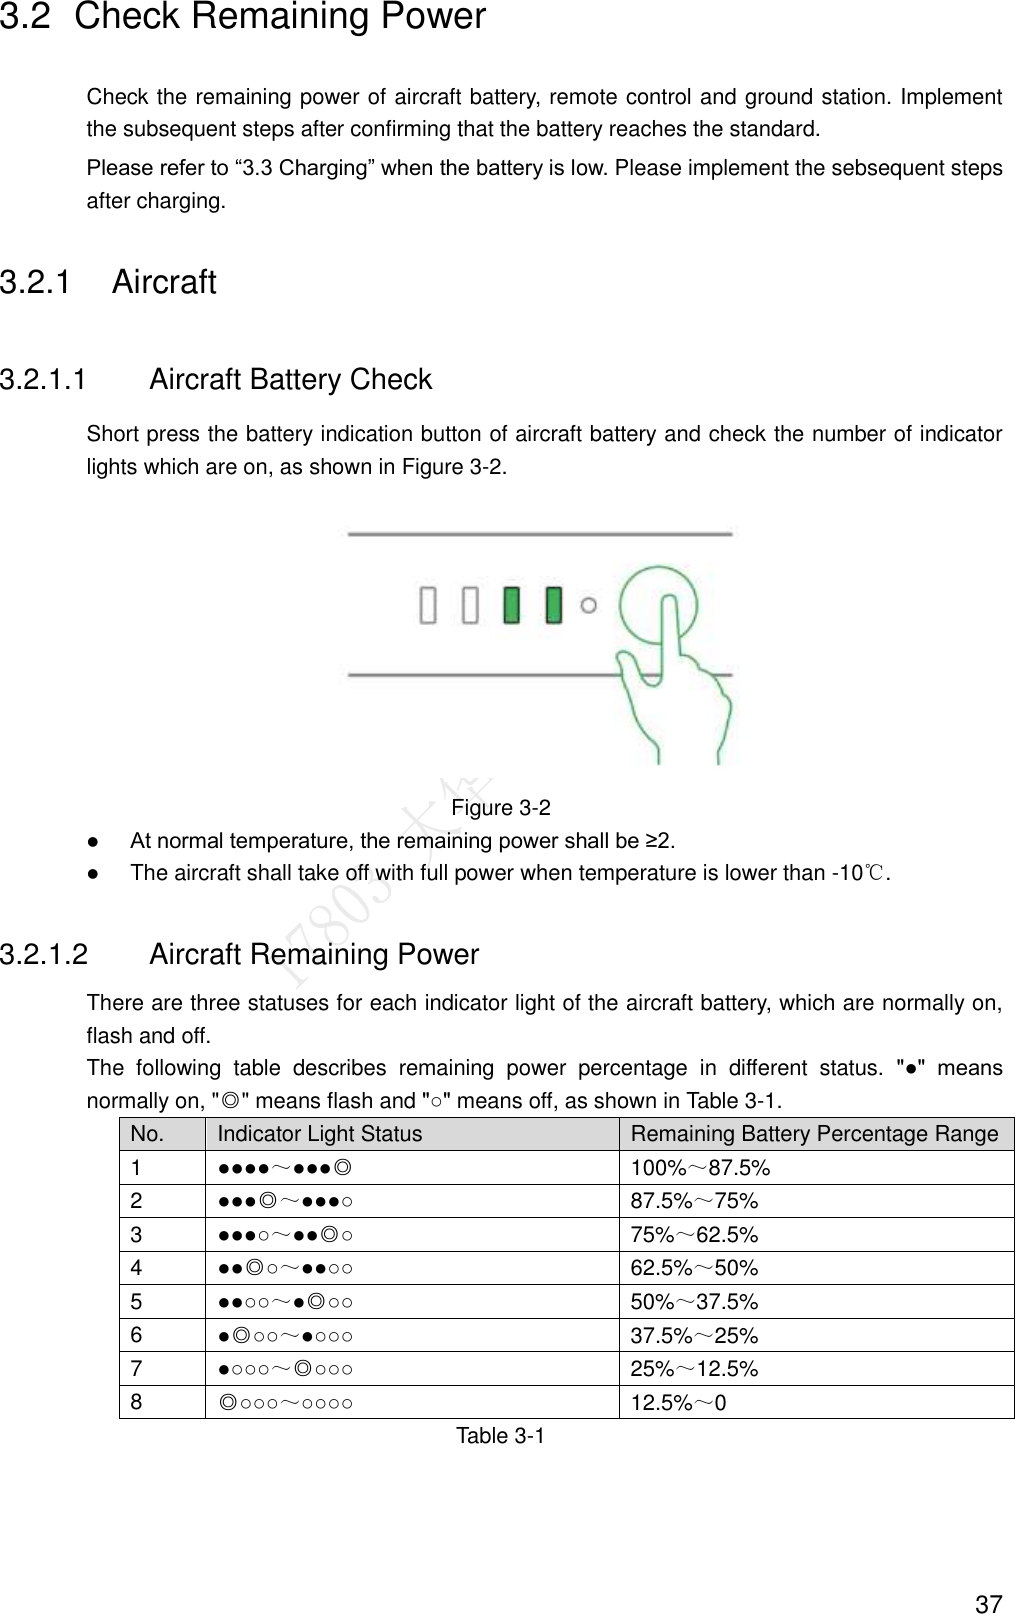  37 3.2  Check Remaining Power Check the remaining power of aircraft battery, remote control and ground station. Implement the subsequent steps after confirming that the battery reaches the standard. Please refer to “3.3 Charging” when the battery is low. Please implement the sebsequent steps after charging. 3.2.1  Aircraft   3.2.1.1  Aircraft Battery Check Short press the battery indication button of aircraft battery and check the number of indicator lights which are on, as shown in Figure 3-2.  Figure 3-2  At normal temperature, the remaining power shall be ≥2.  The aircraft shall take off with full power when temperature is lower than -10℃. 3.2.1.2  Aircraft Remaining Power There are three statuses for each indicator light of the aircraft battery, which are normally on, flash and off. The  following  table  describes  remaining  power  percentage  in  different  status.  &quot;●&quot;  means normally on, &quot;◎&quot; means flash and &quot;○&quot; means off, as shown in Table 3-1. No. Indicator Light Status Remaining Battery Percentage Range 1 ●●●●～●●●◎ 100%～87.5% 2 ●●●◎～●●●○ 87.5%～75% 3 ●●●○～●●◎○ 75%～62.5% 4 ●●◎○～●●○○ 62.5%～50% 5 ●●○○～●◎○○ 50%～37.5% 6 ●◎○○～●○○○ 37.5%～25% 7 ●○○○～◎○○○ 25%～12.5% 8 ◎○○○～○○○○ 12.5%～0 Table 3-1 